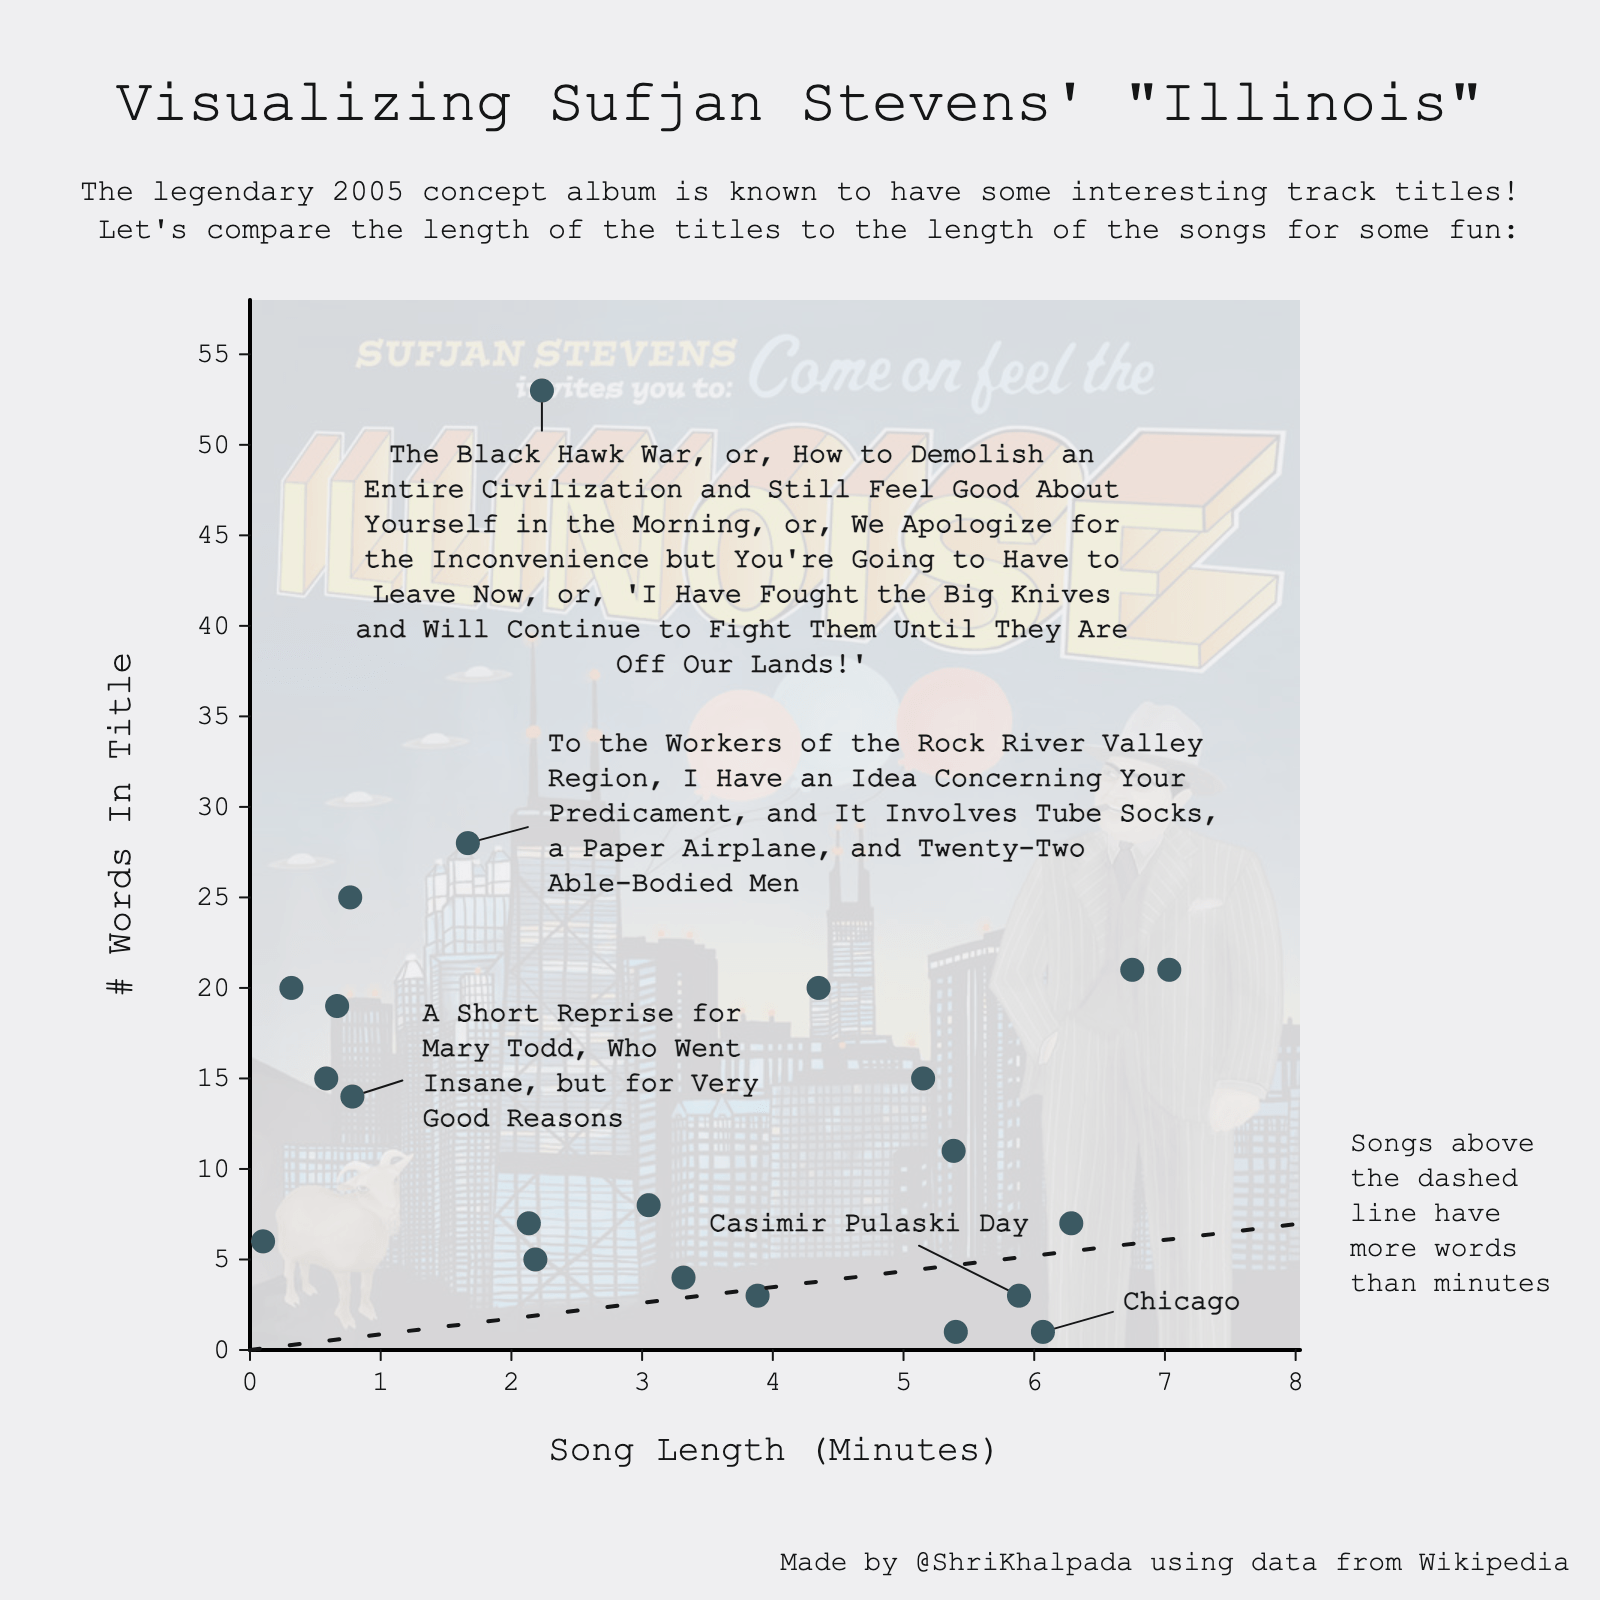 A scatter plot titled "Visualizing Sufjan Stevens' 'Illinois'" showing a comparison between the length of song titles and song lengths, with a color background representing the album cover.